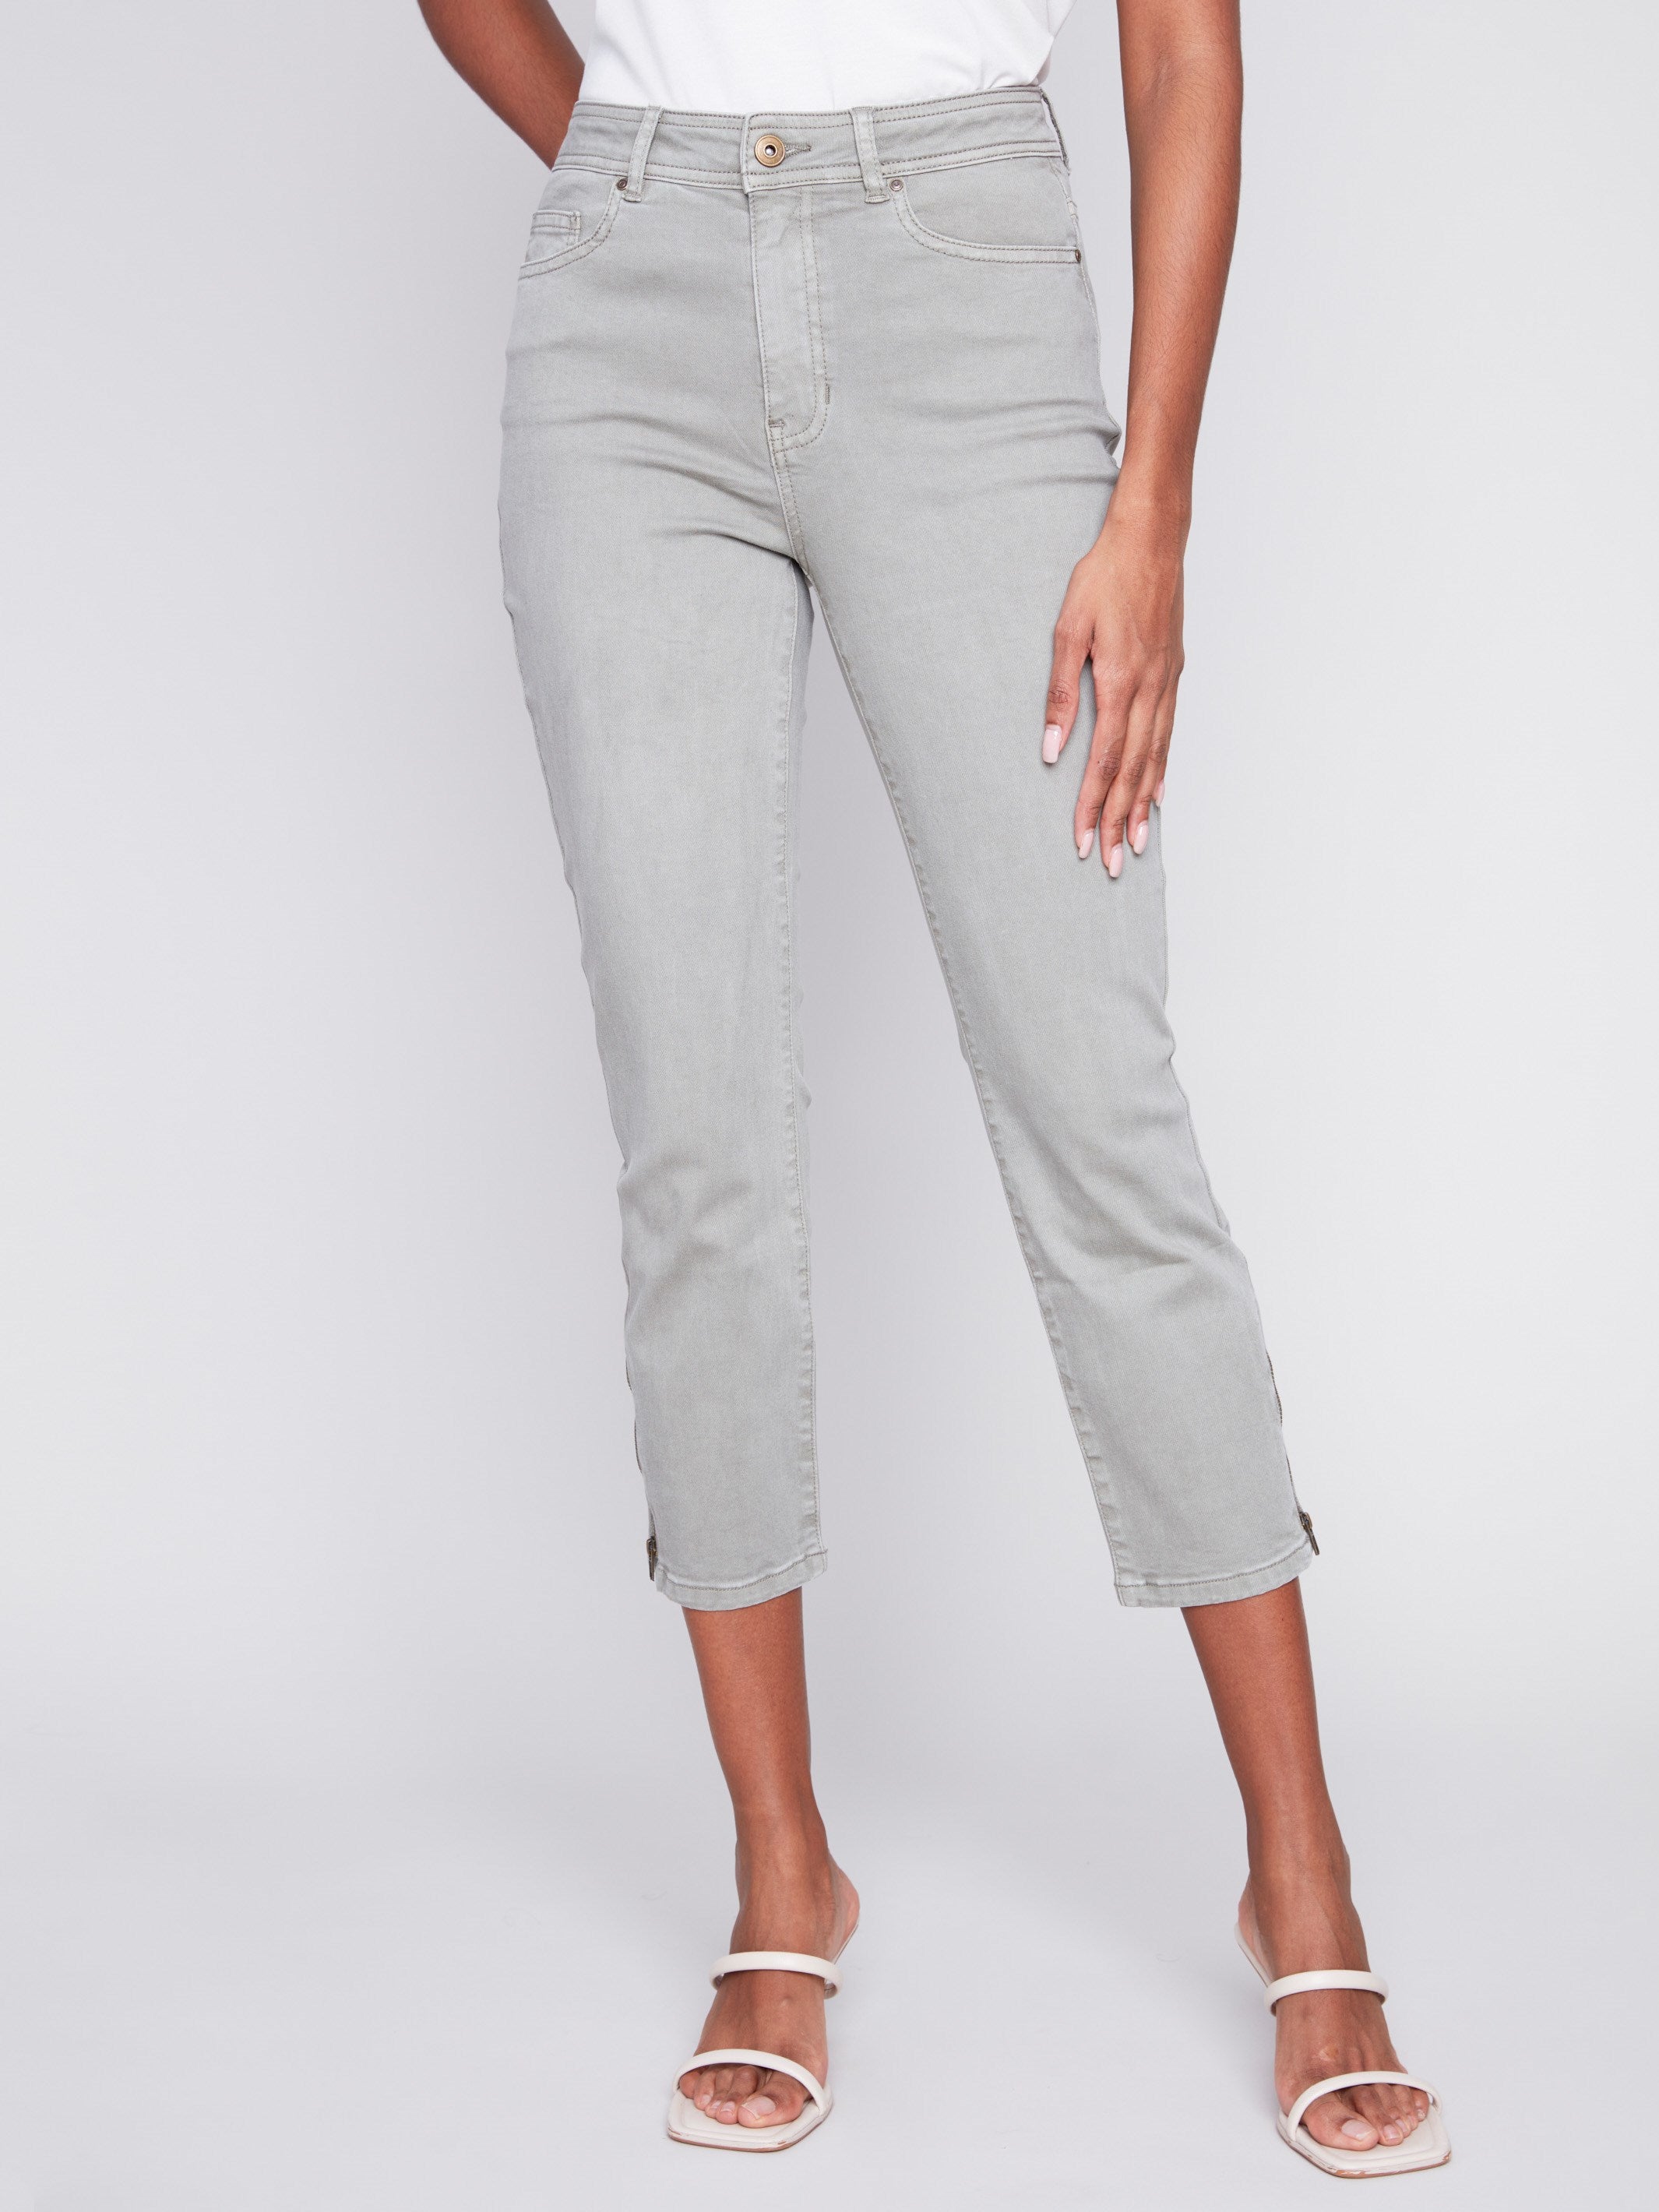 Charlie B Cropped Twill Pants with Zipper Detail - Celadon - Image 3